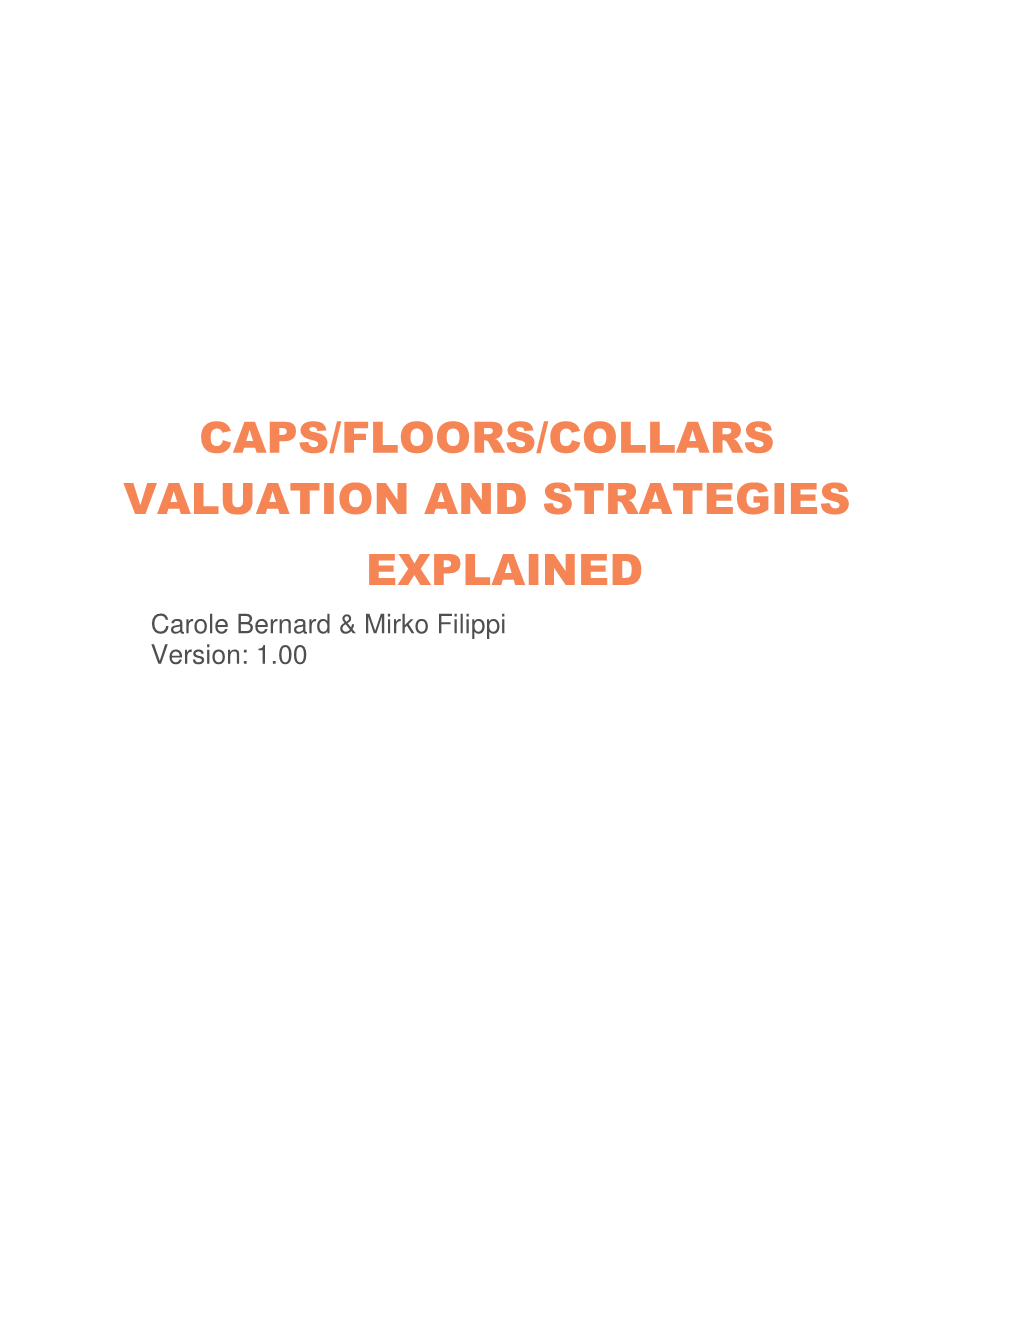 Caps/Floors/Collars Valuation and Strategies Explained